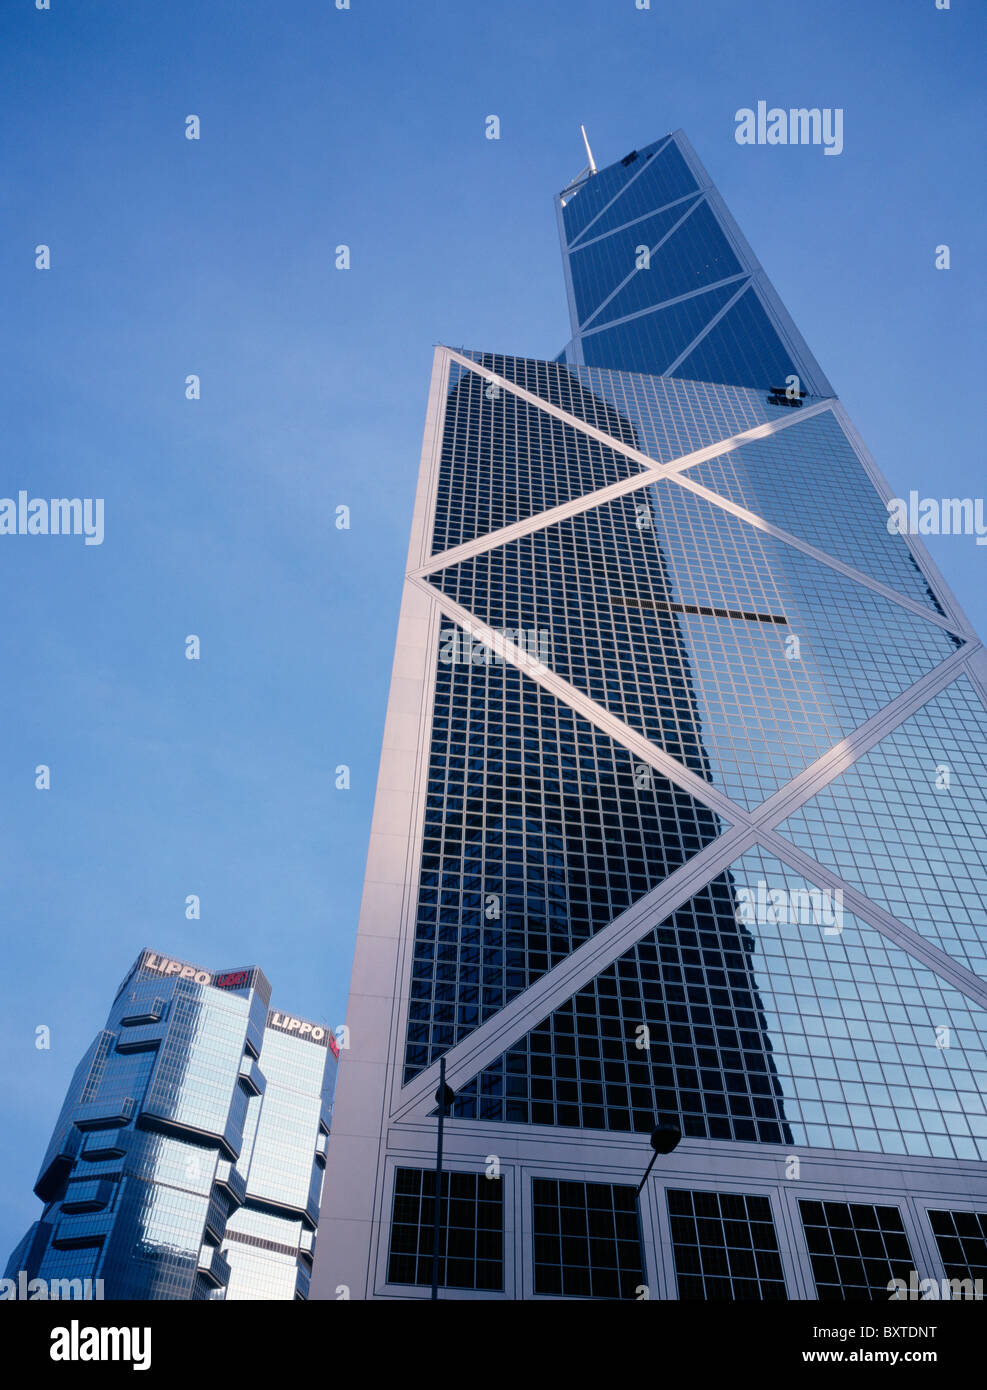 Bank Of China And Lippo Building Stock Photo